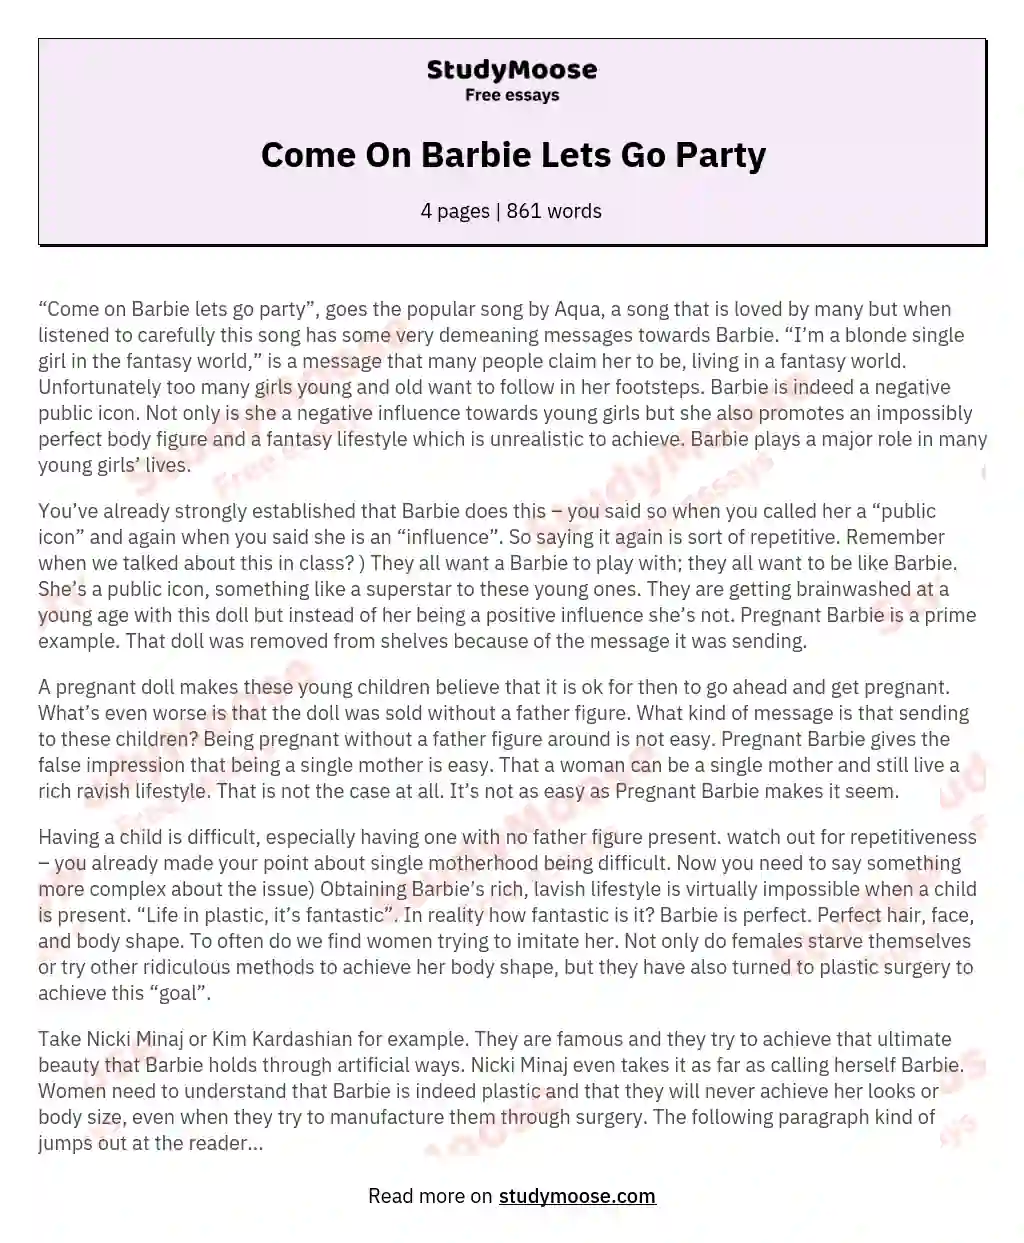 Come On Barbie Lets Go Party essay